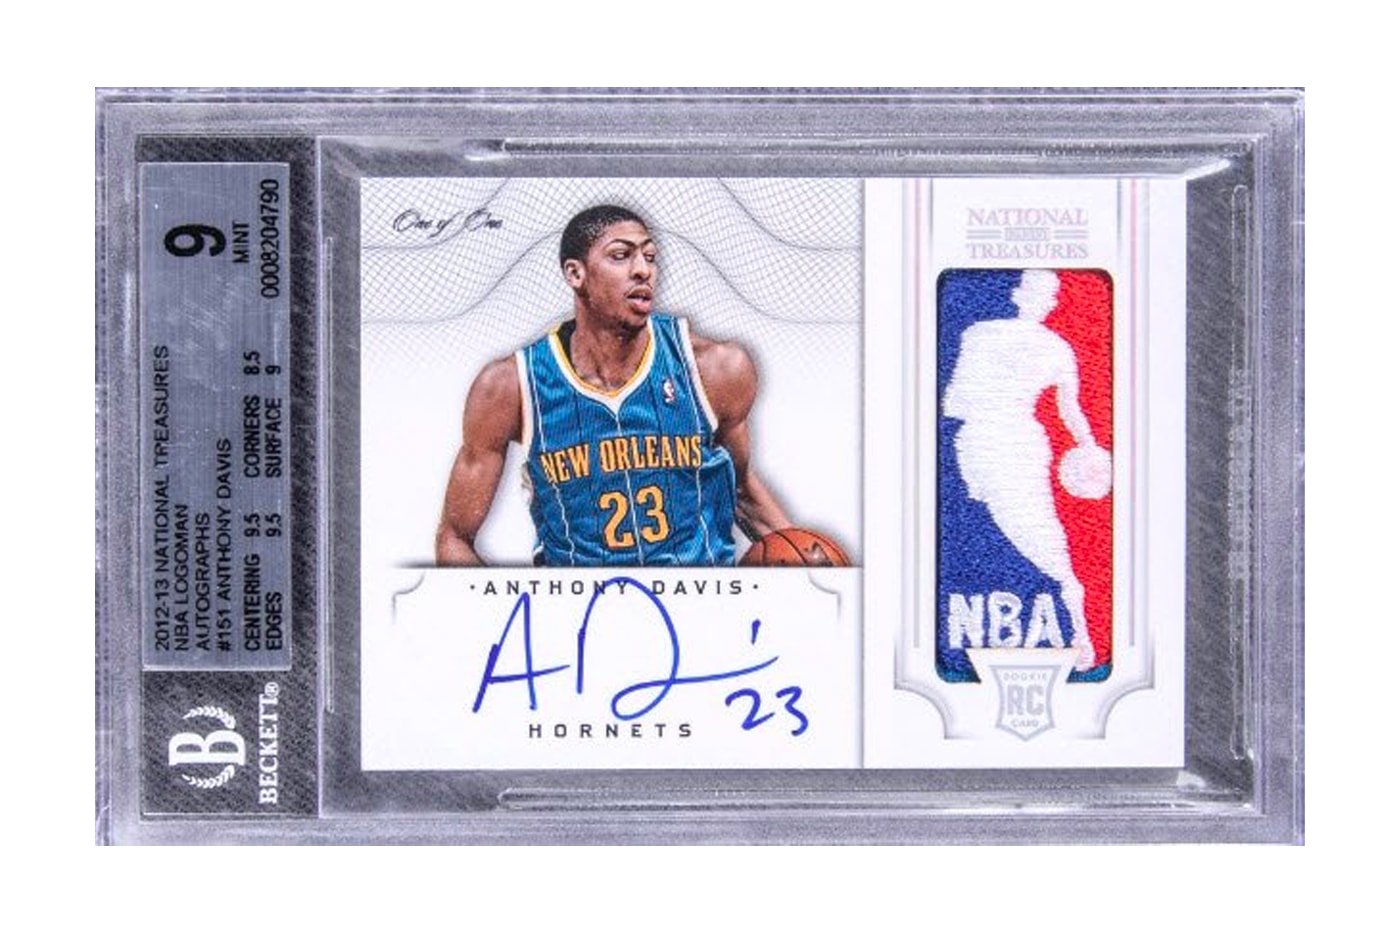 Anthony Davis Autographed Rookie Card Goldin Auction NBA Los Angeles Lakers All-Star NCAA Championship Olympic Games Trading Cards Sports Cards Logoman New Orleans Pelicans 